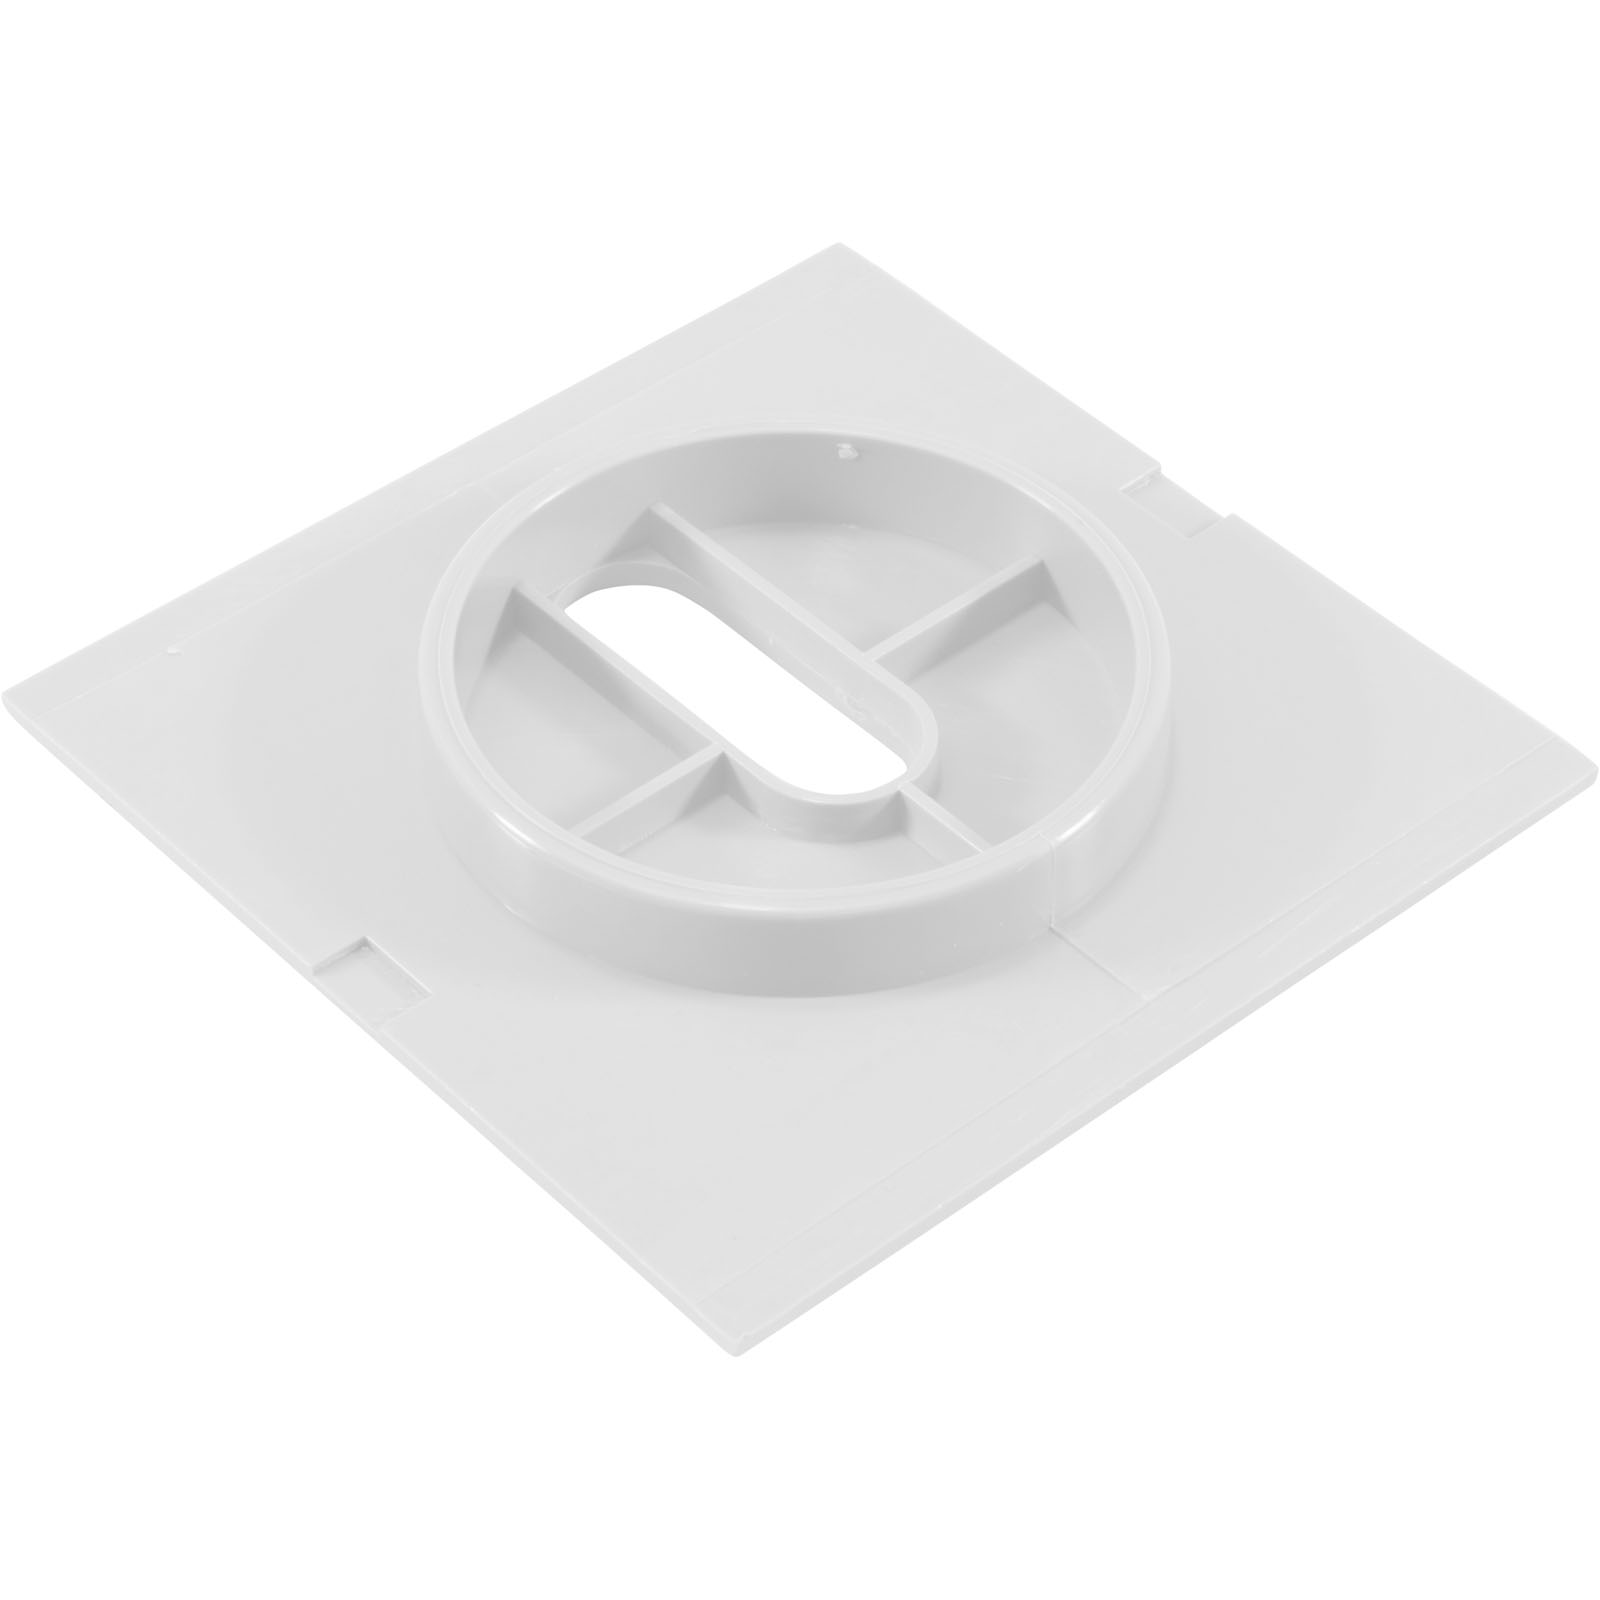 Picture of 25597-000-120 Deck Jet (J-Style) Square Cover White